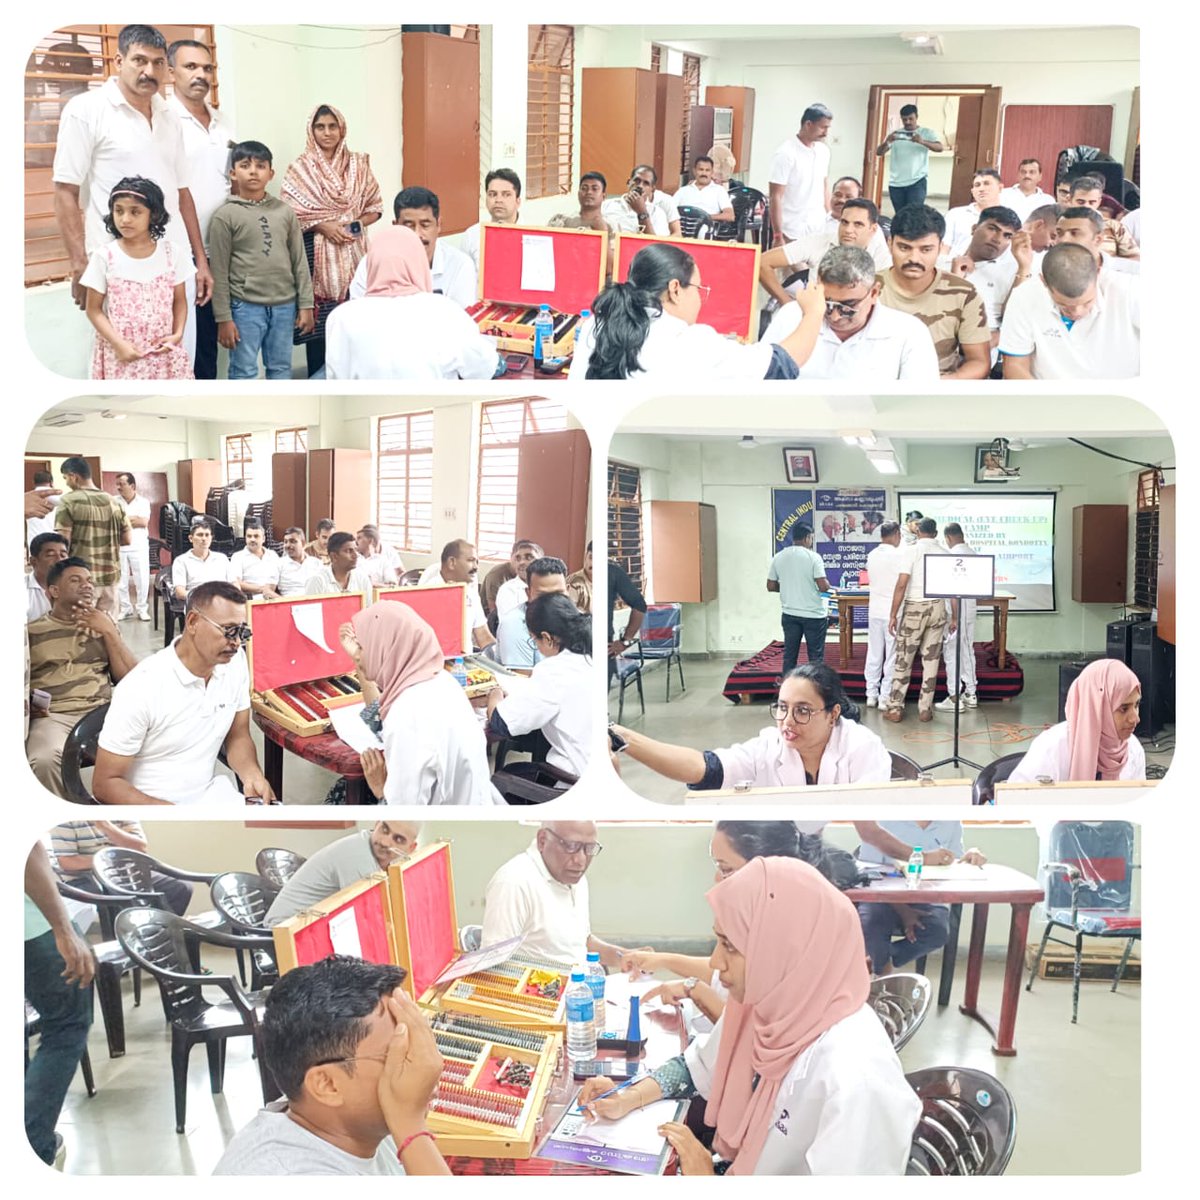 Health is an asset without equal! Health check-up camp for CISF personnel & family members was organised @ CISF Unit ASG Calicut. Various work related health issues & their remedies were addressed. #PROTECTIONandSECURITY #Welfare @HMOIndia @MoHFW_INDIA